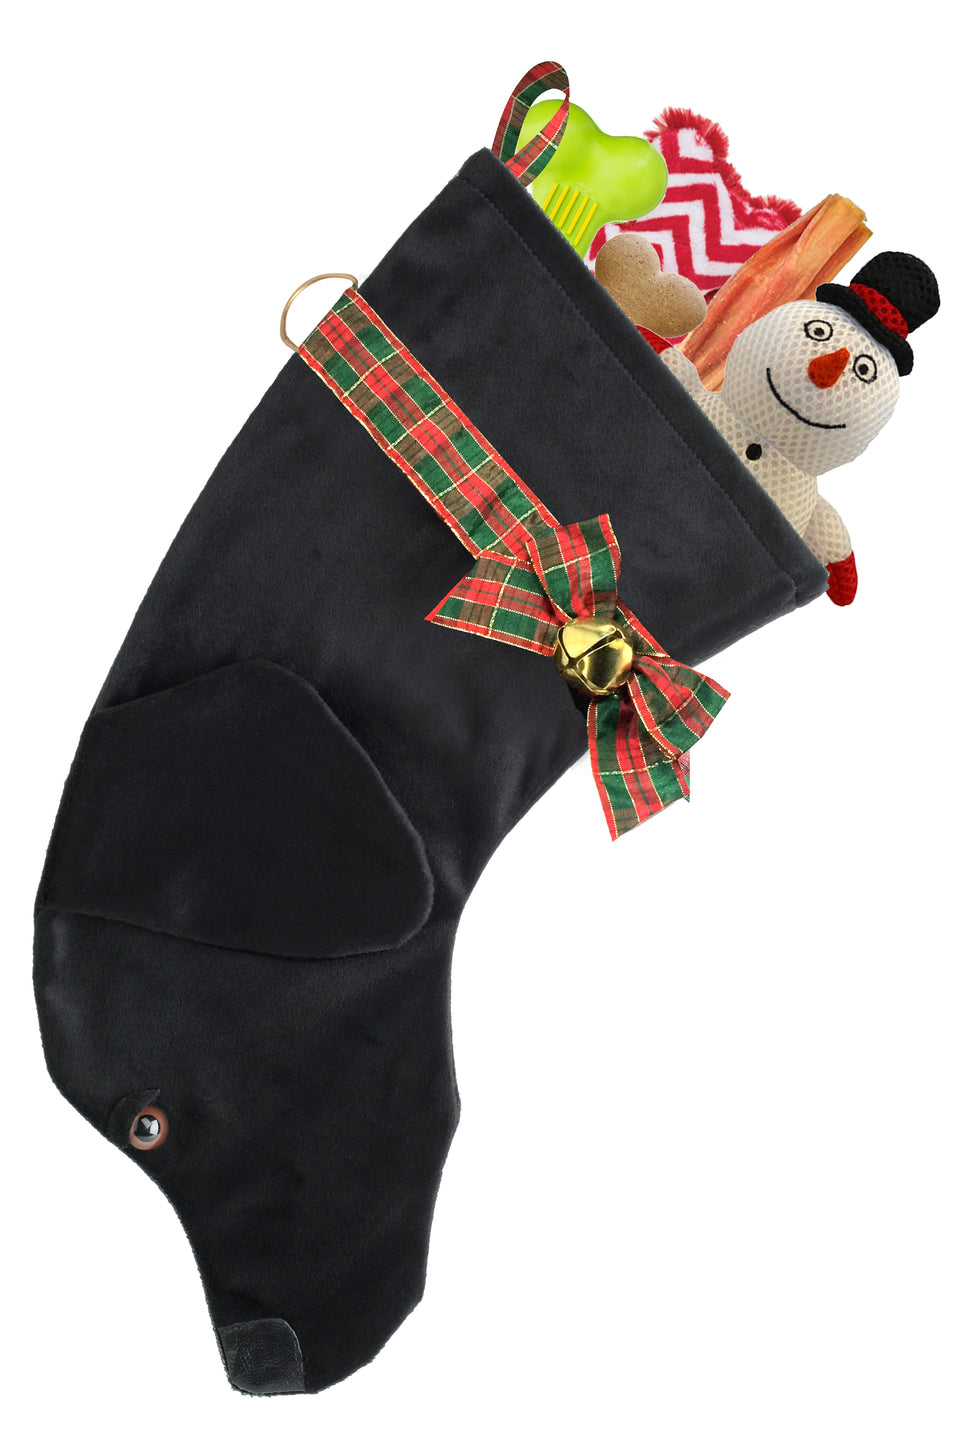 This Black Lab dog shaped Christmas stocking is perfect for stuffing toys and treats into to spoil your fur baby for Christmas, or whatever holiday you celebrate!